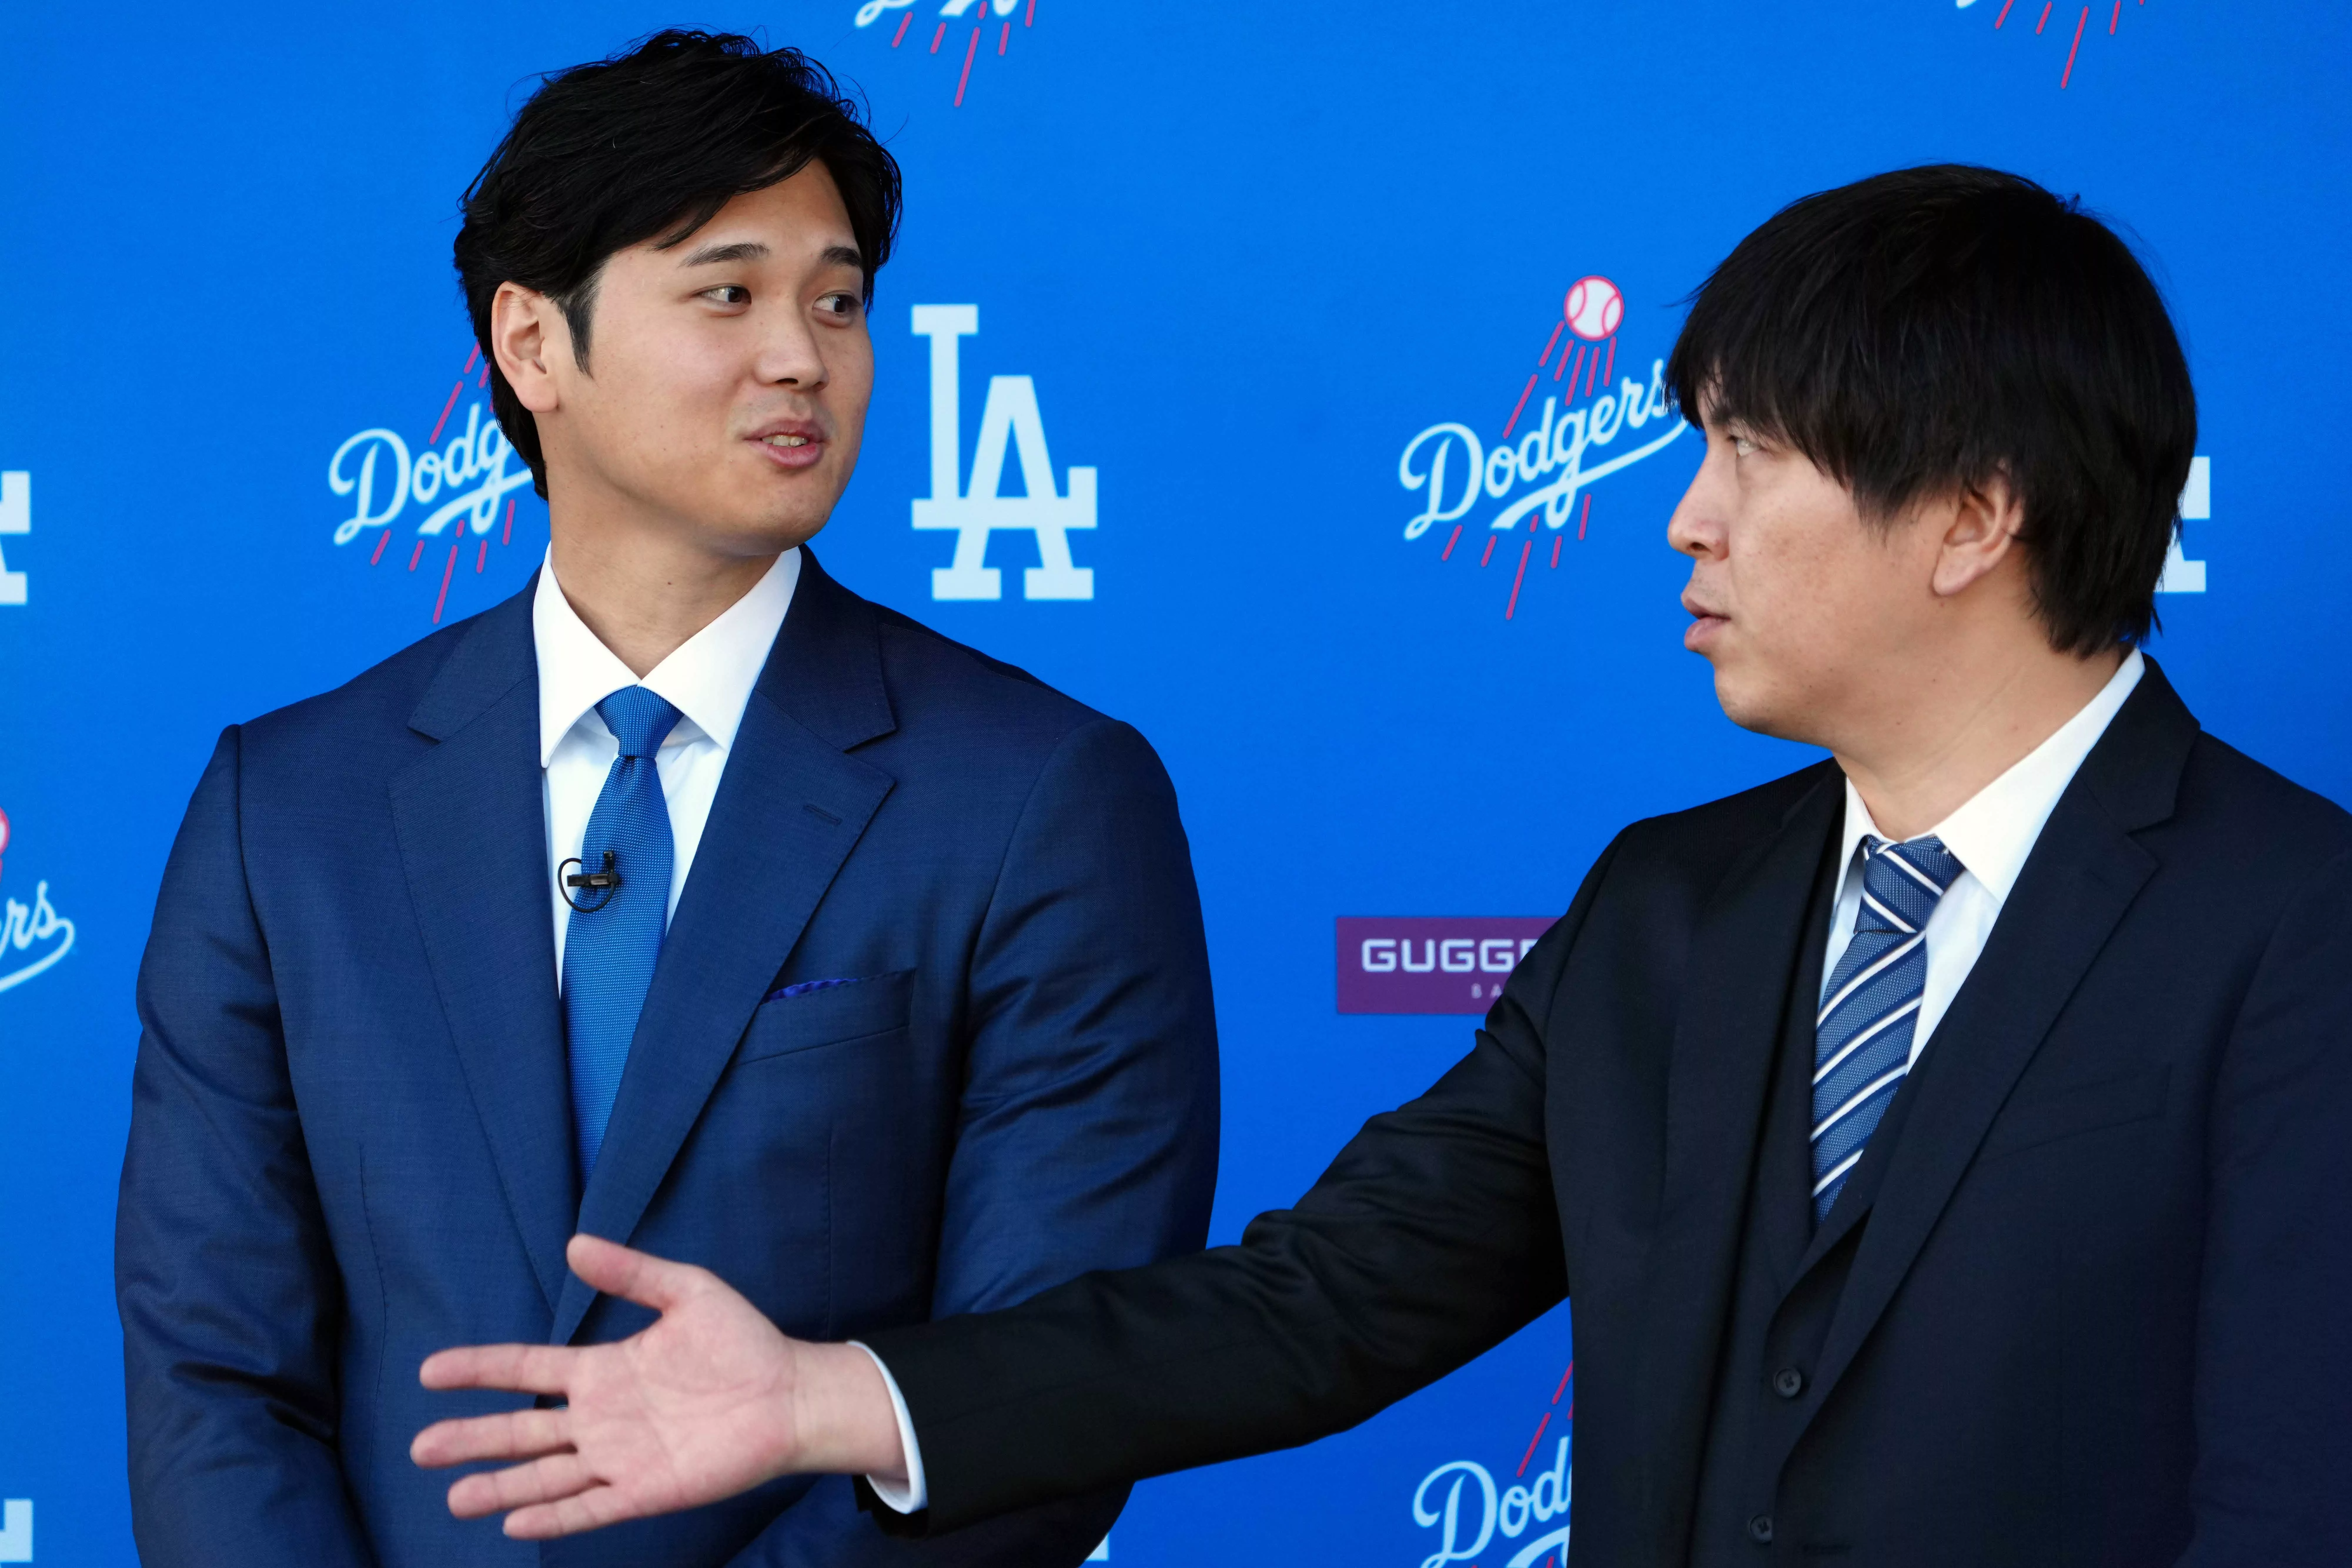 mlb-los-angeles-dodgers-press-conference